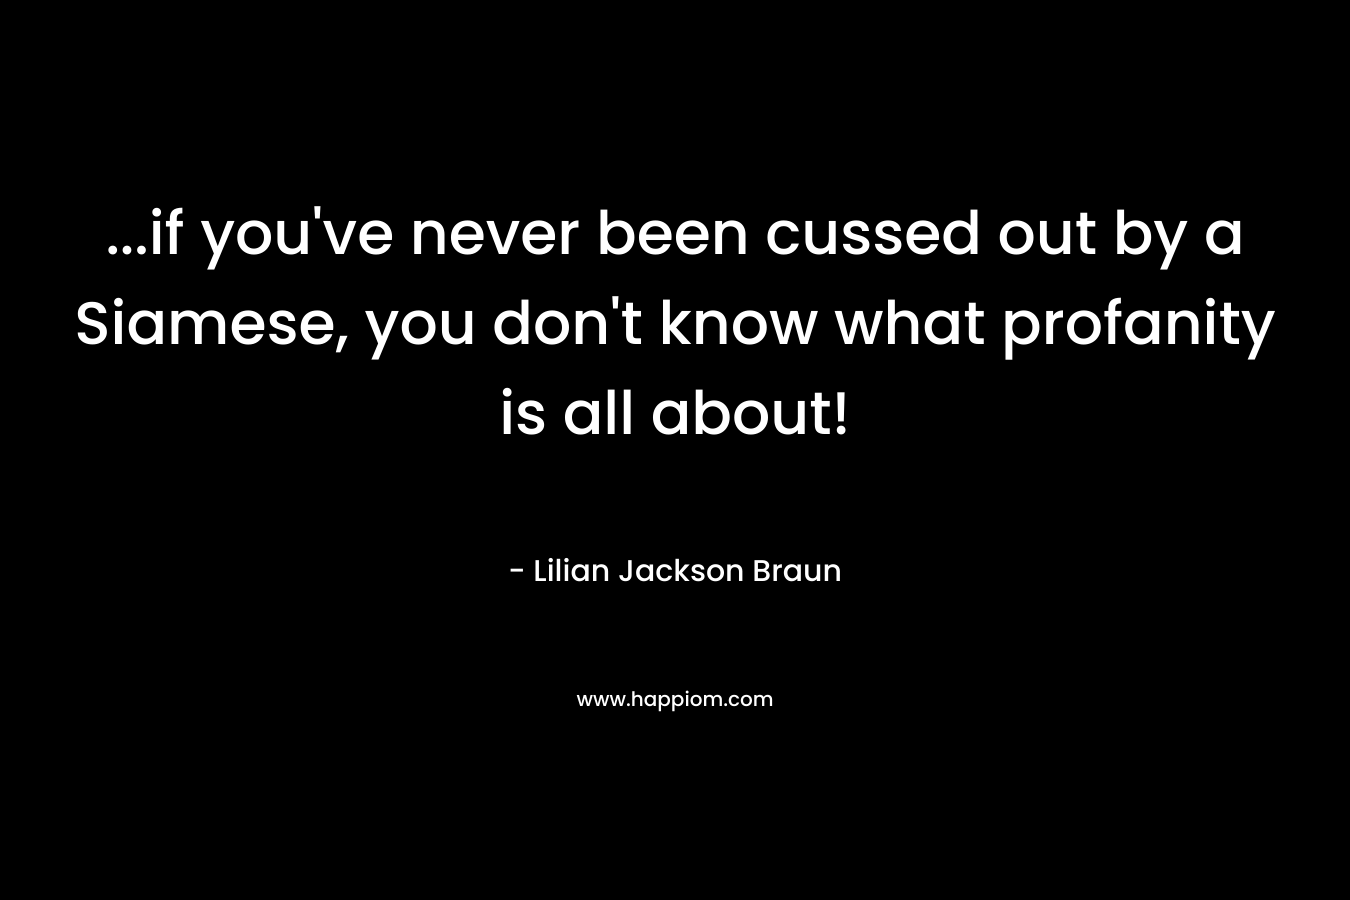 …if you’ve never been cussed out by a Siamese, you don’t know what profanity is all about! – Lilian Jackson Braun